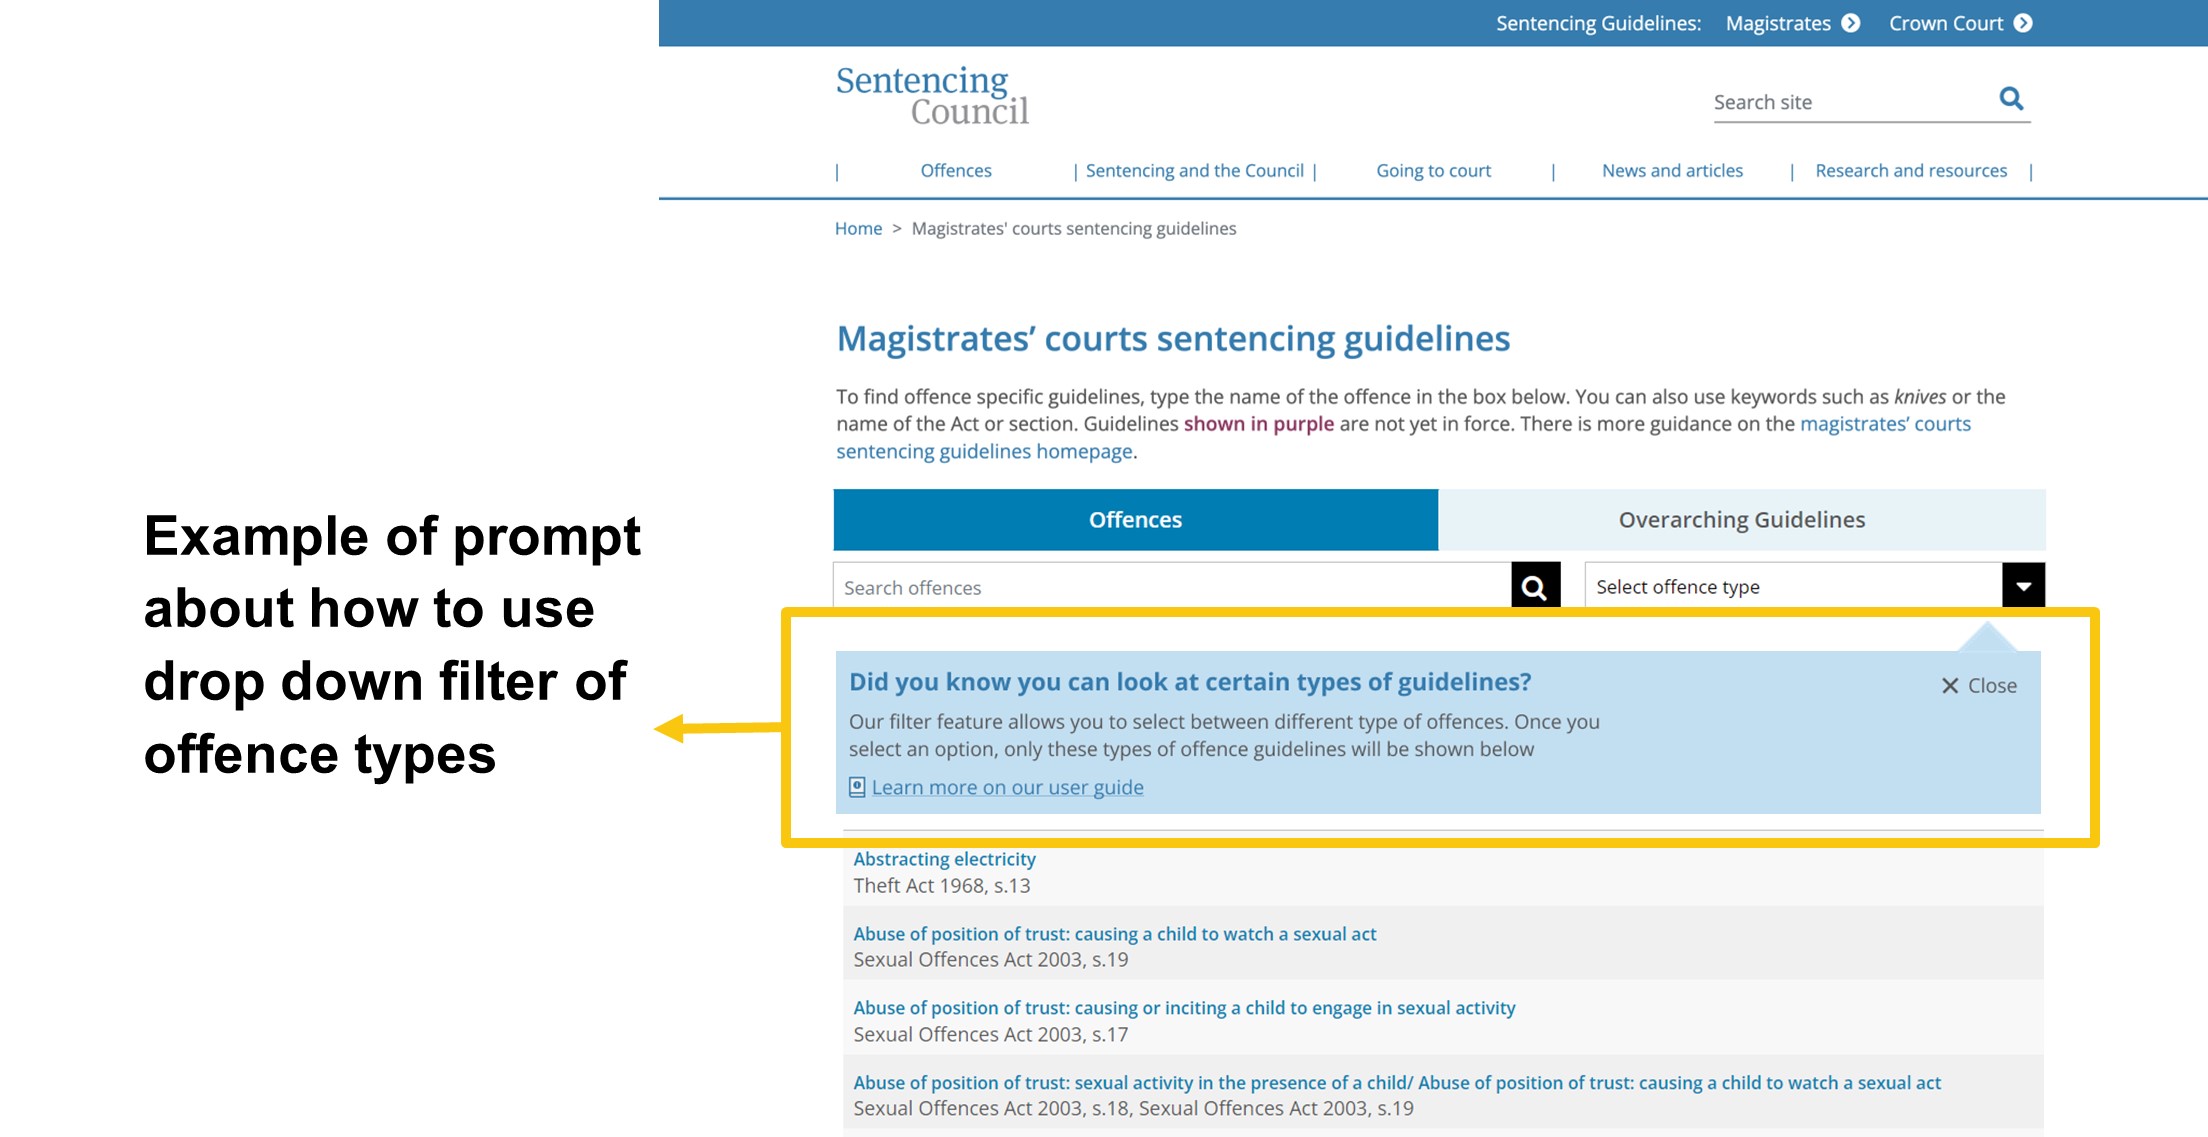 Image showing a mock up of recommendation A5. A prompt provides users with information about how to filter by offence type